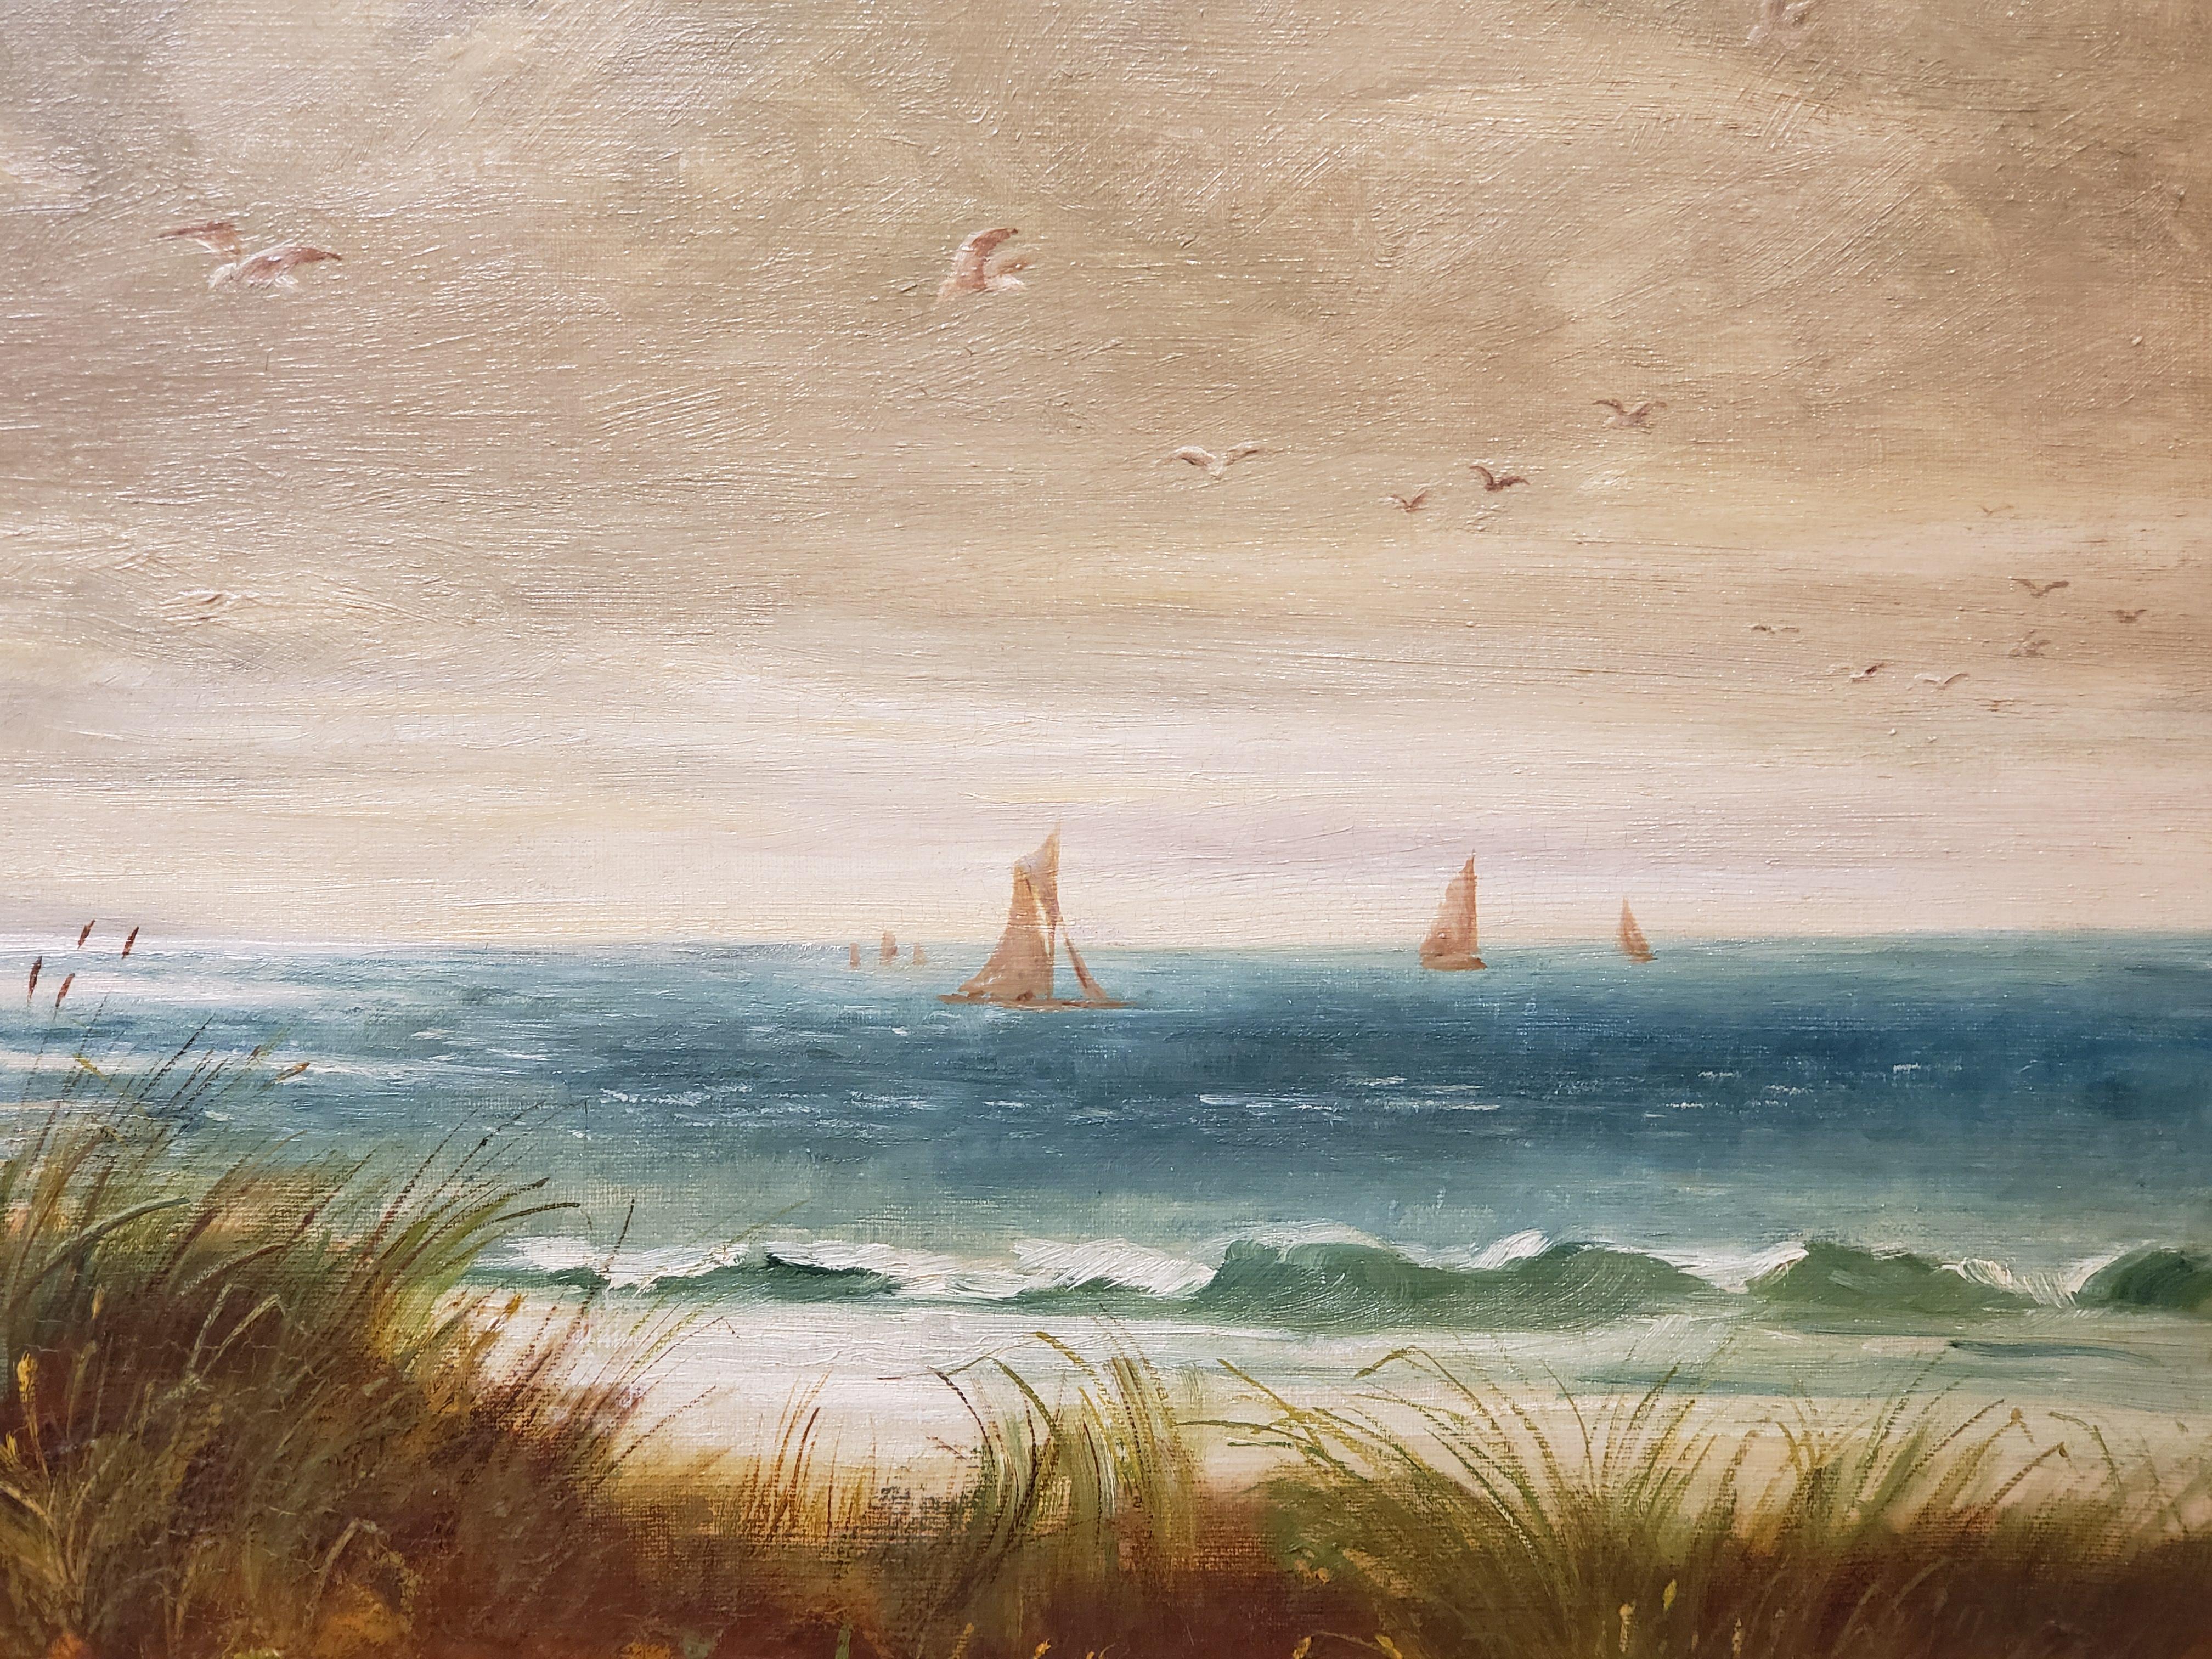 River Orwell an Oil Painting signed by Ellen Hartridge dated 1905.

The painting is a beach view of the River Orwell with the surf rolling in and sail boats in the distance and is oil on canvas measuring 28